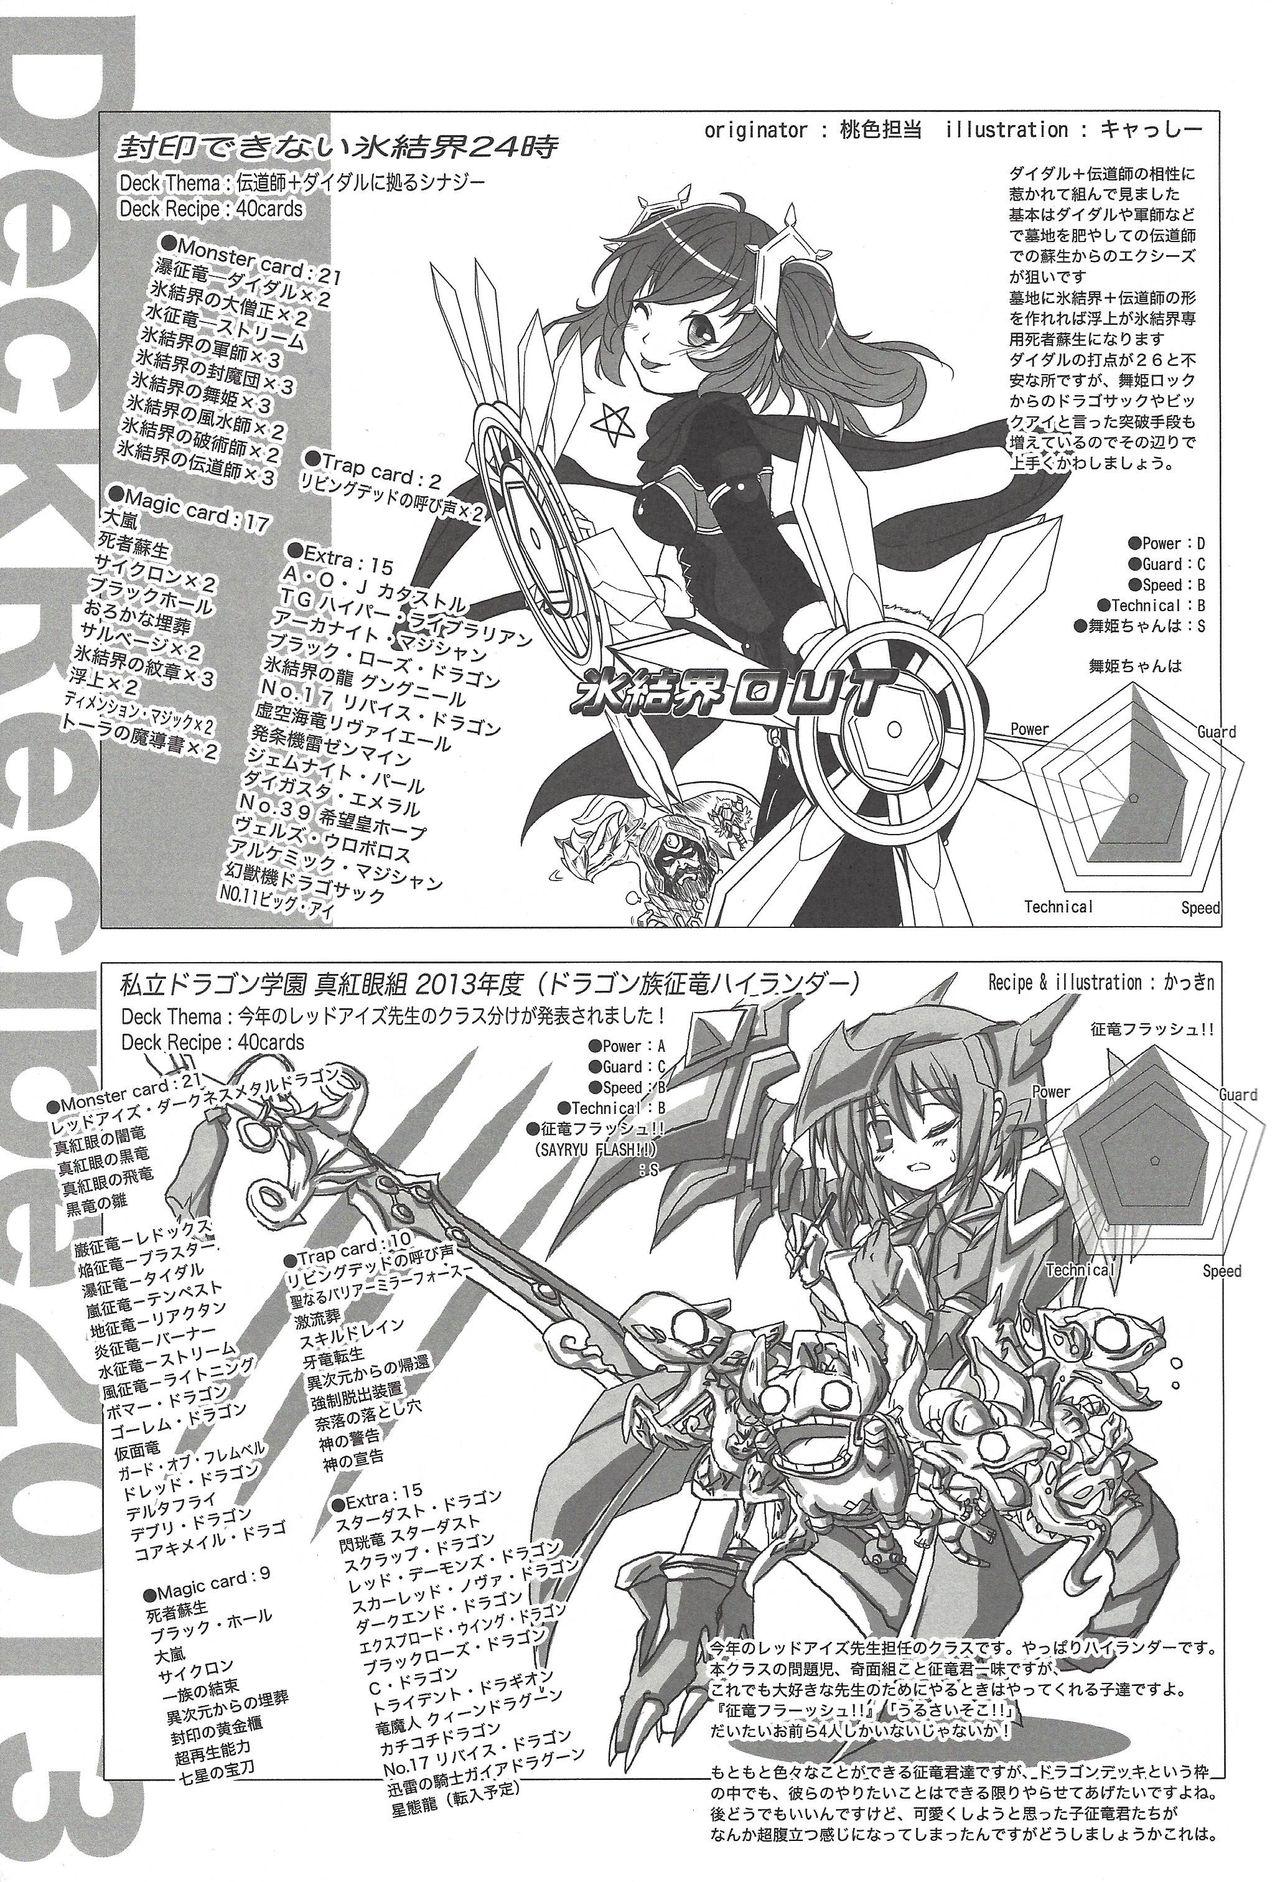 Hole Instant issue Yu ☆ Gi ☆ Oh - Yu gi oh zexal Free Oral Sex - Page 4